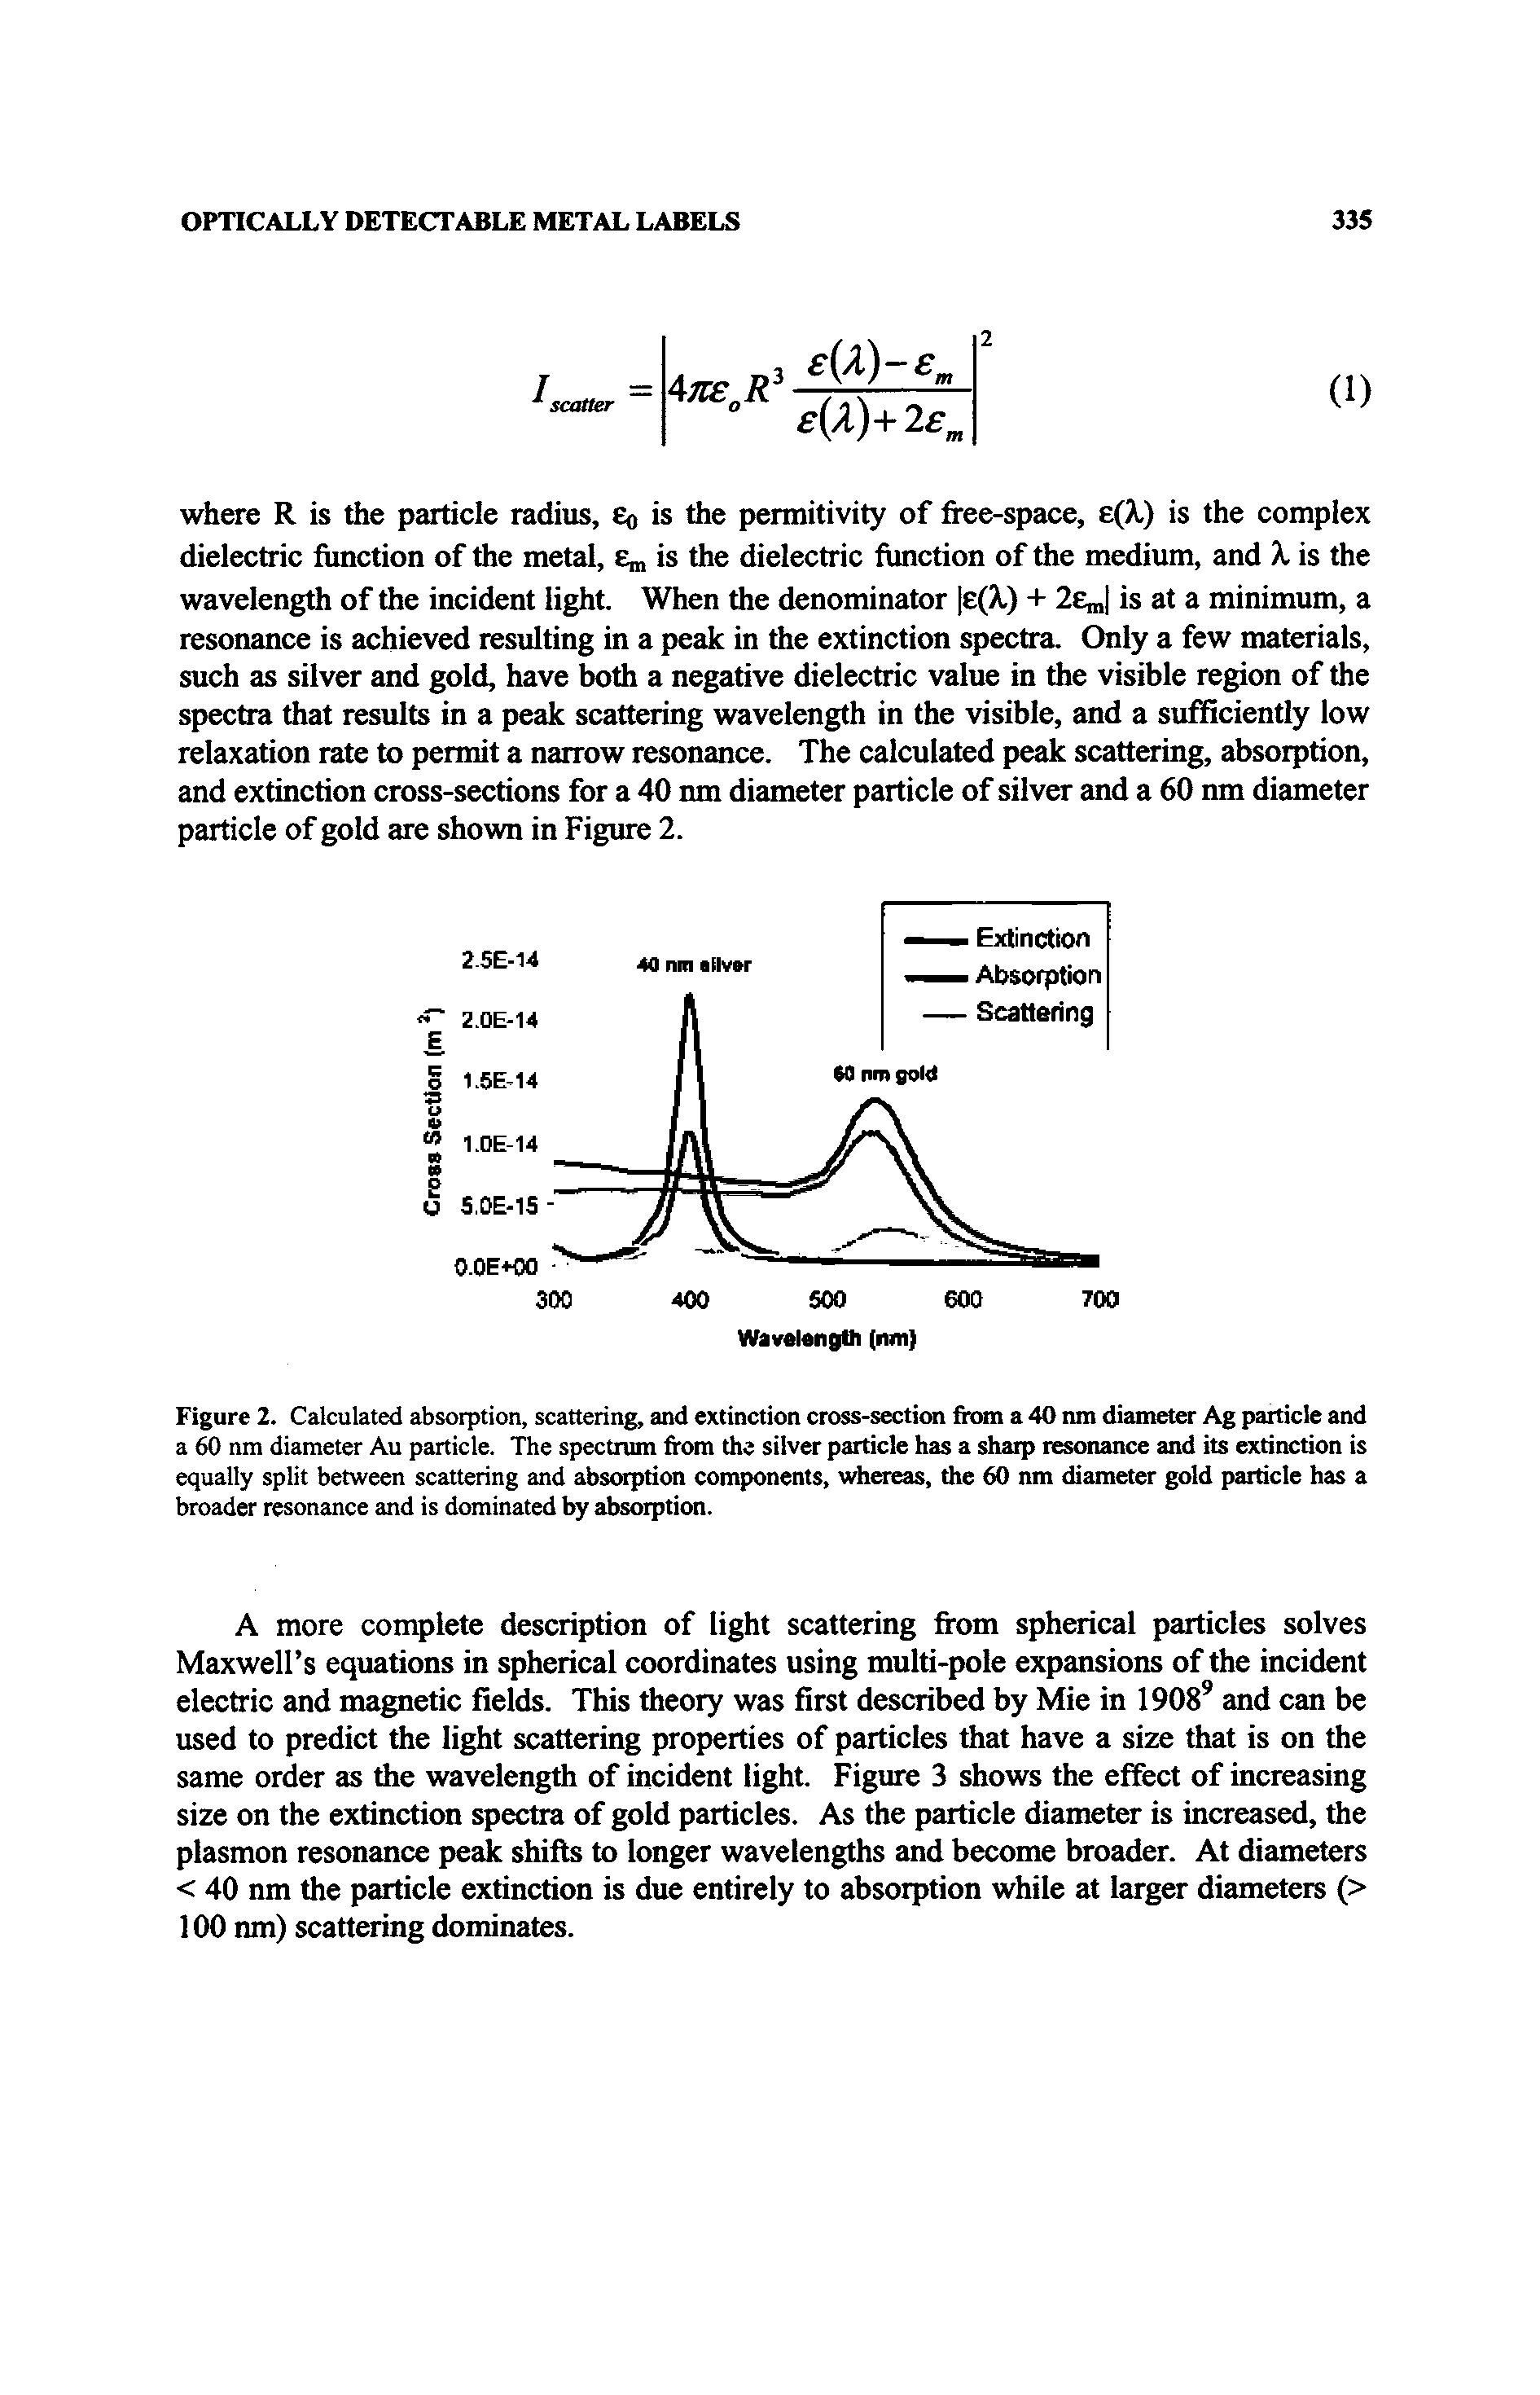 Figure 2. Calculated absorption, scattering, and extinction cross-section from a 40 nm diameter Ag particle and a 60 nm diameter Au particle. The spectrum from the silver particle has a sharp resonance and its extinction is equally split between scattering and absorption components, udiereas, the 60 nm diameter gold particle has a broader resonance and is dominated by absorption.